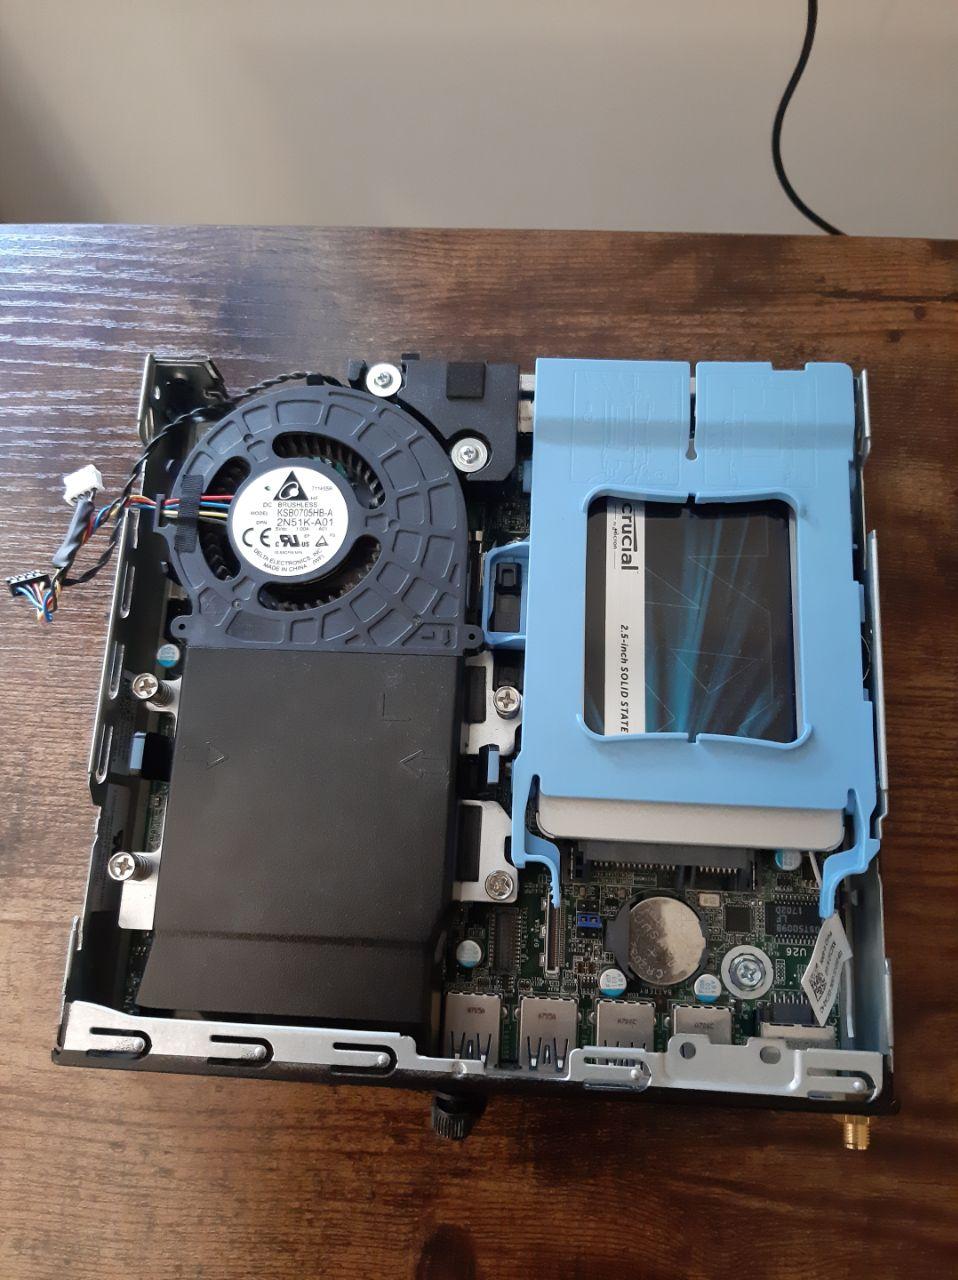 Dell Optiplex 7040 micro CPU Fan Replacement - Hardware - Level1Techs Forums